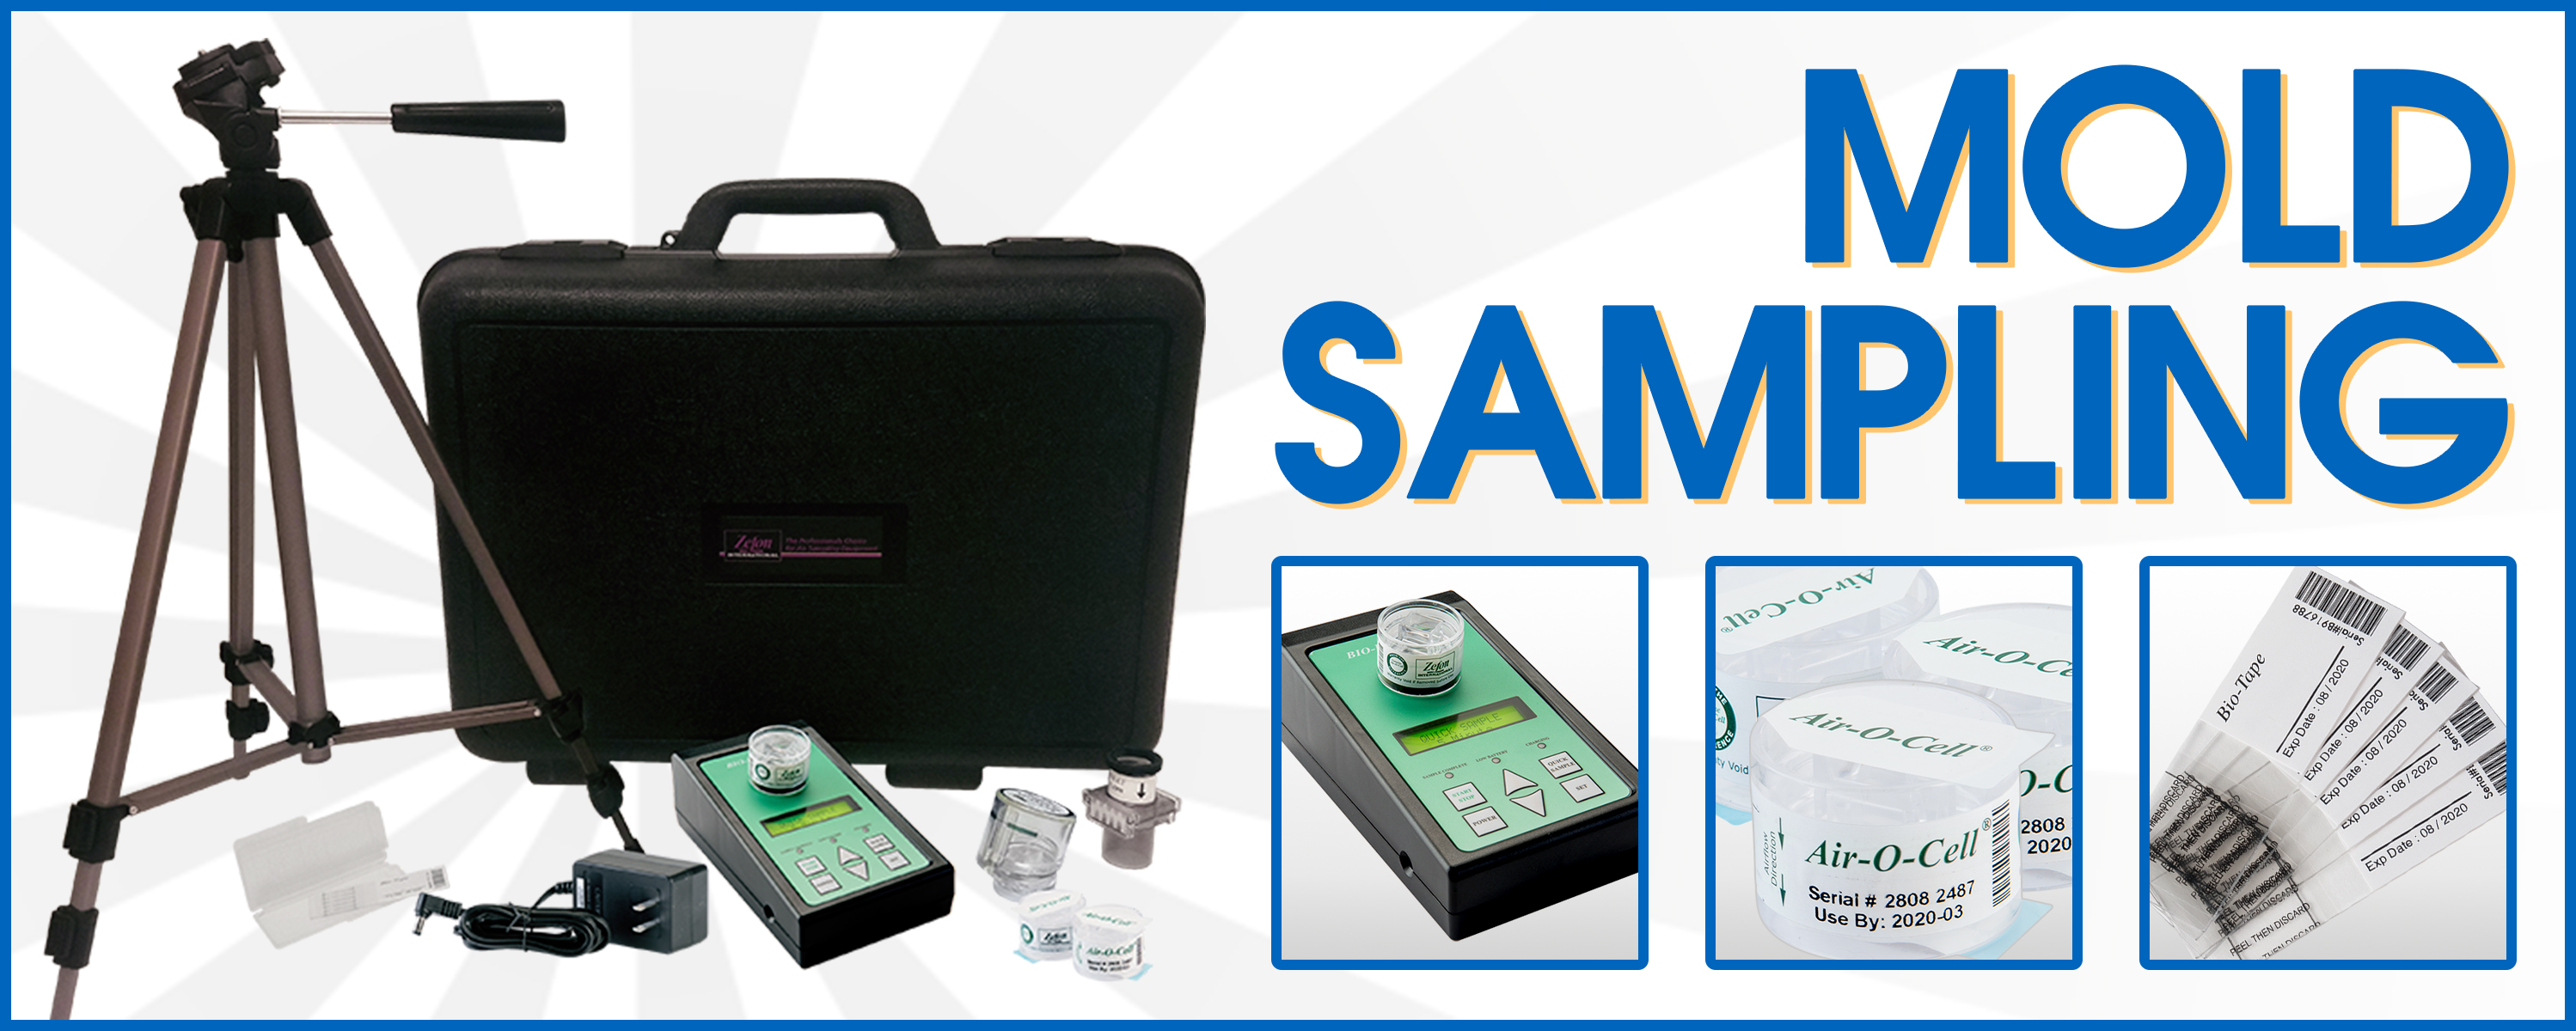 Mold Sampling Products for Sale